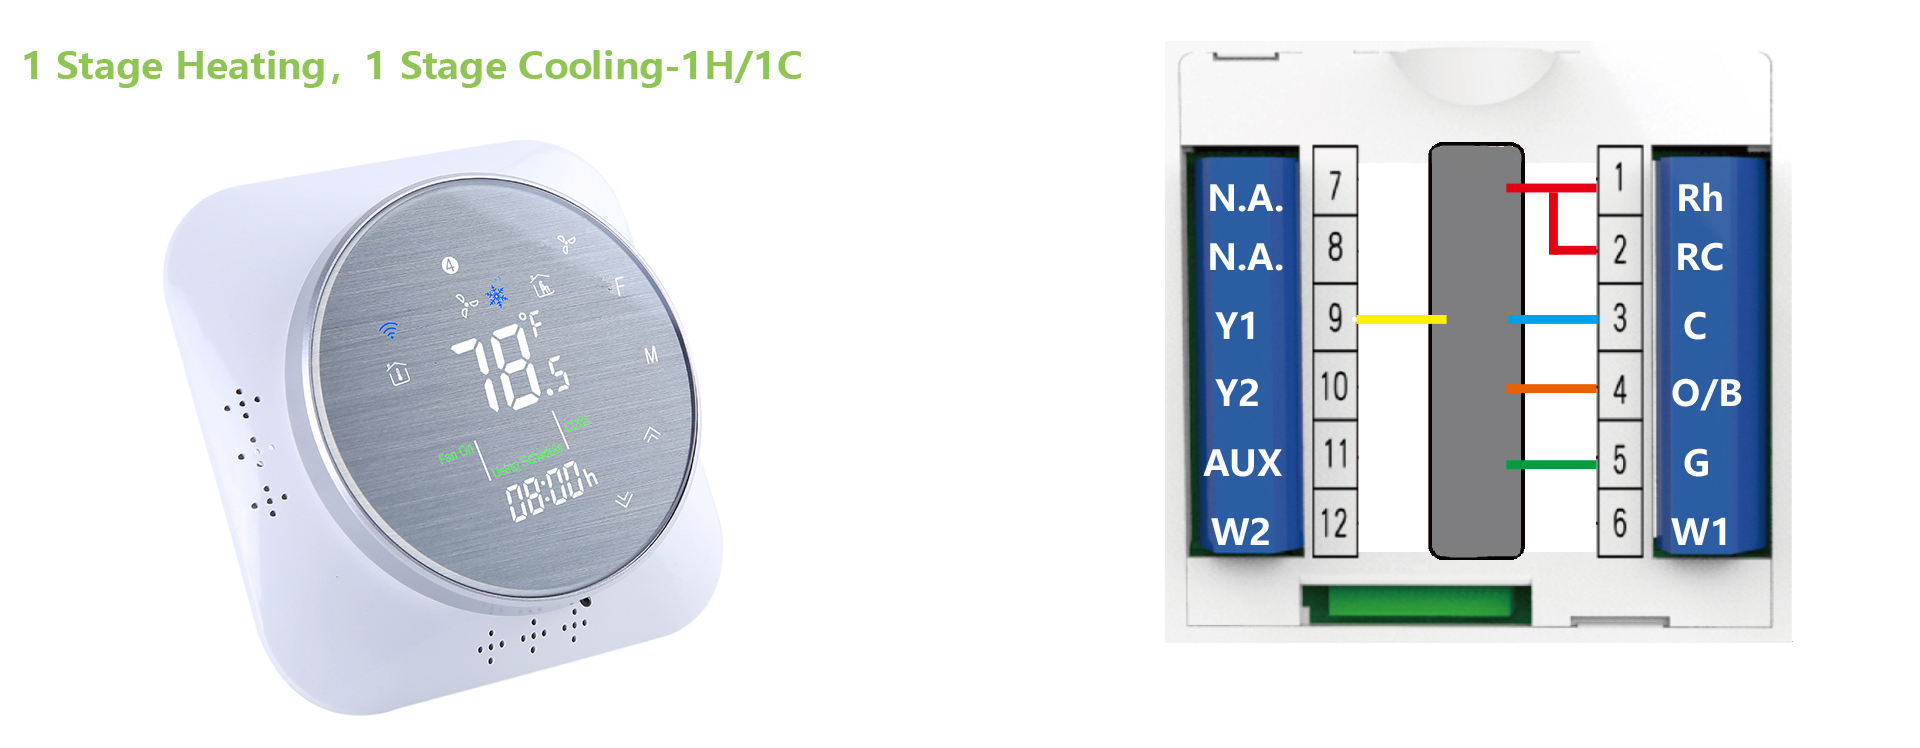 BECA BHP-6000 Non Wifi Conventional/Heat Pump Room Thermostat  Support online purchase-Xiamen Beca Energysaving Technology